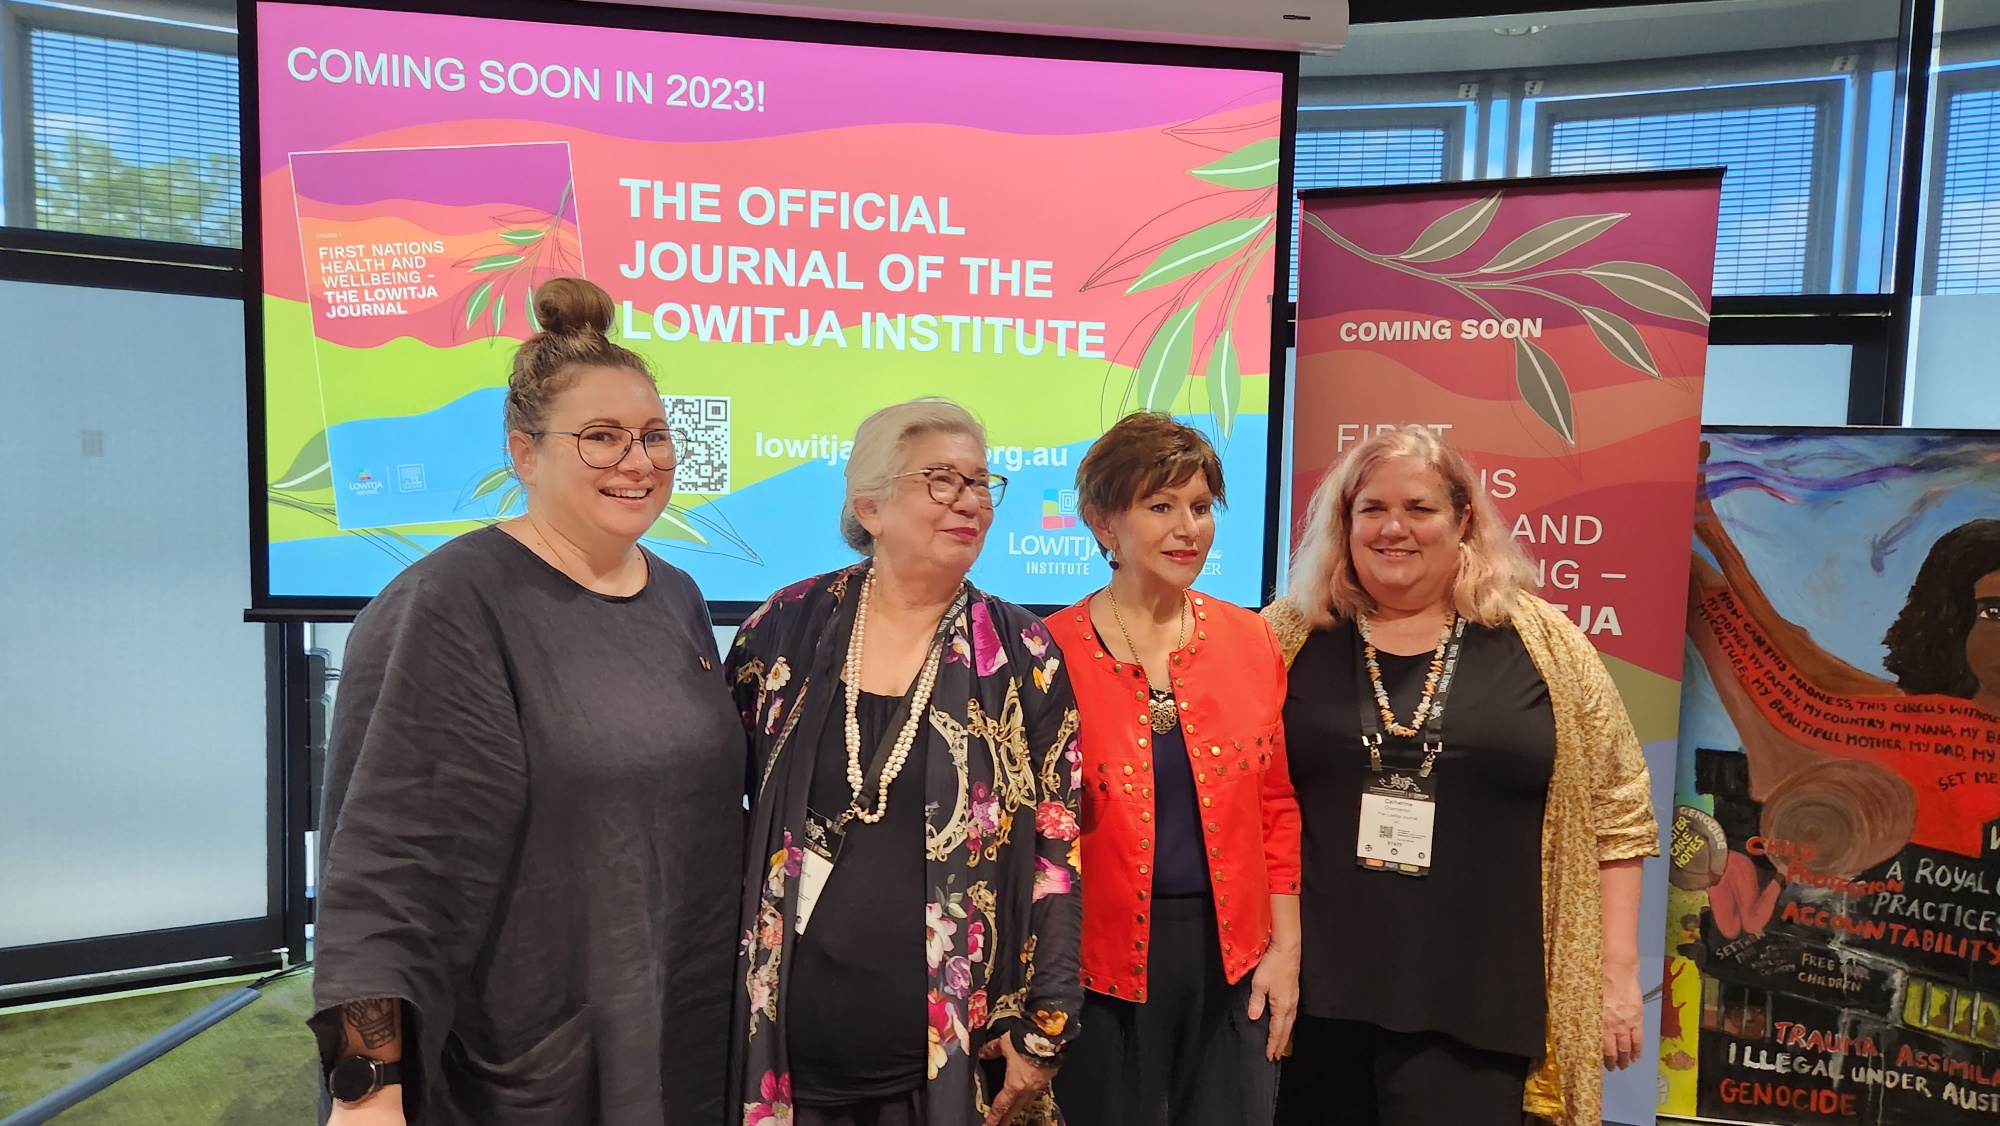 Establishing First Nations Health and Wellbeing: The Lowitja Journal – reflections from the inaugural Editor-in-Chief - Featured Image